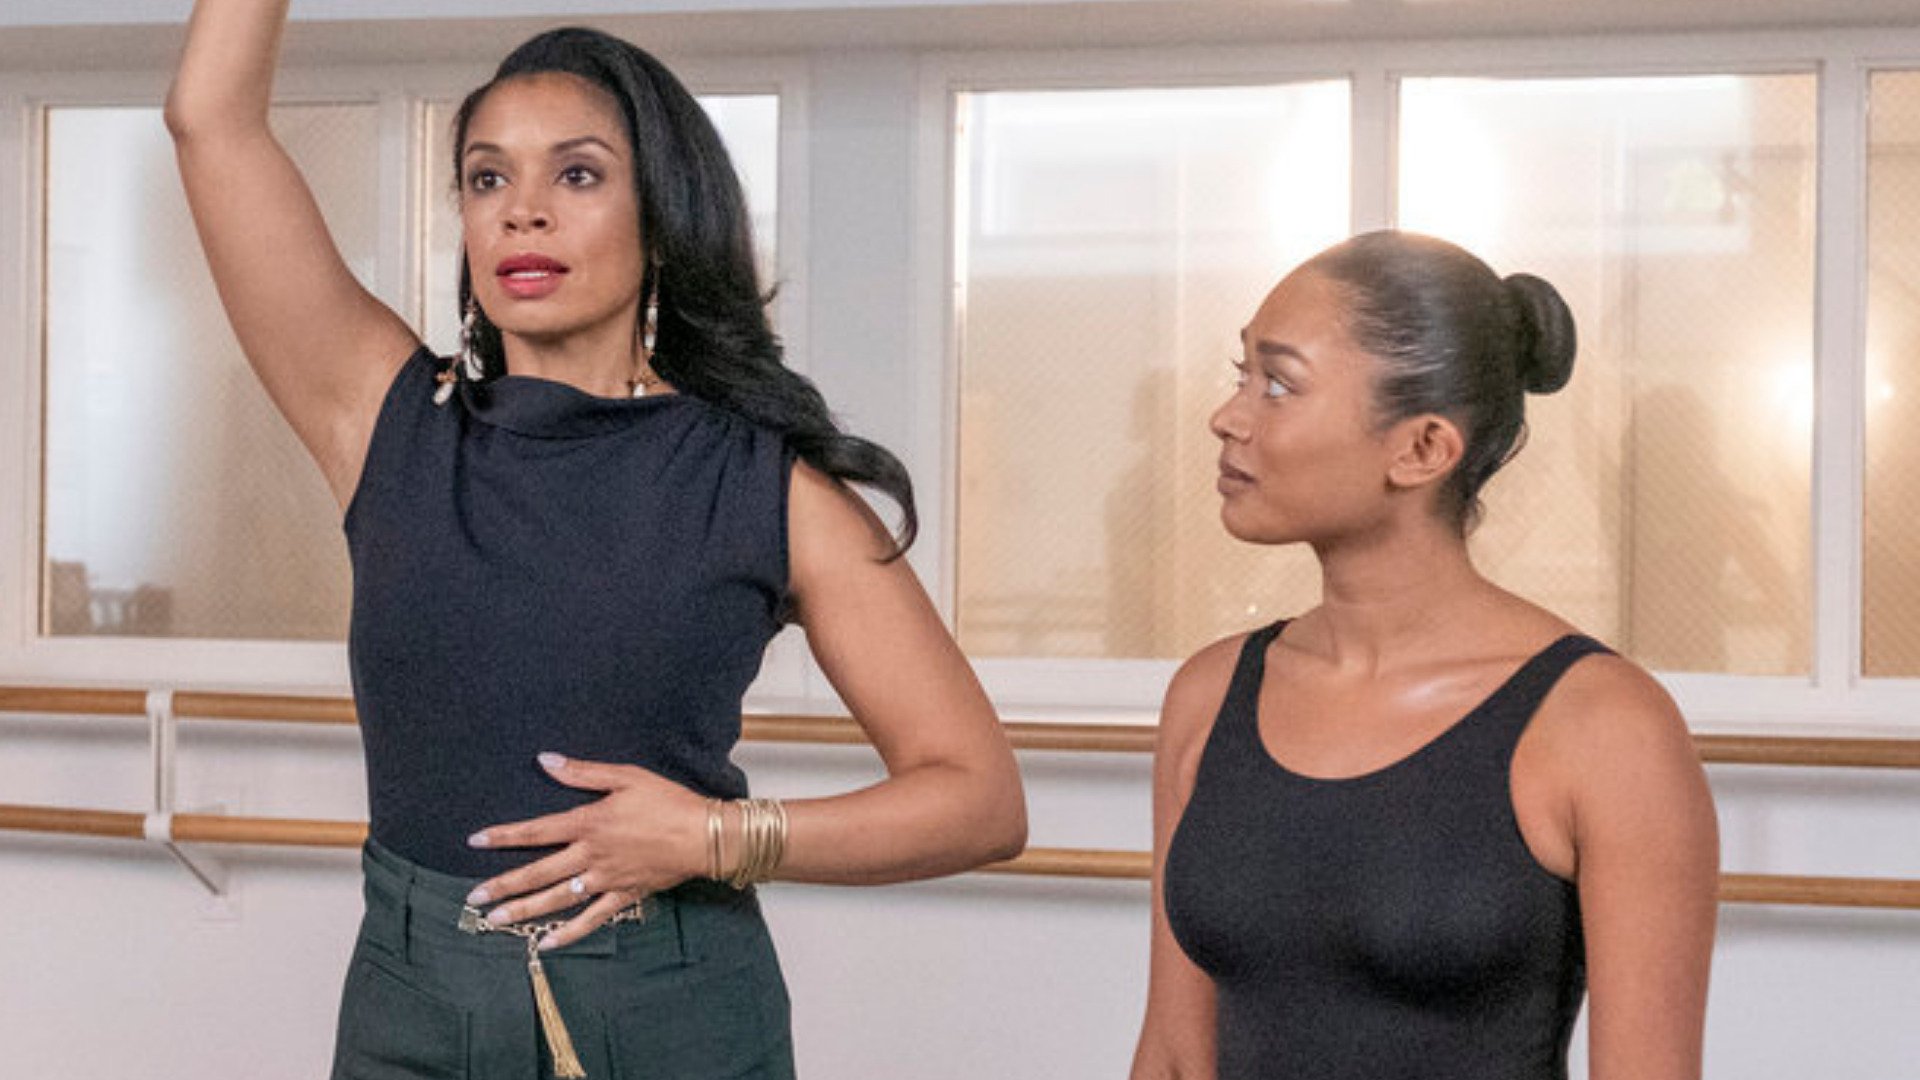 Kelechi Watson as Beth teaching Jazlyn Martin as Stacey dance in ‘This Is Us’ Season 6